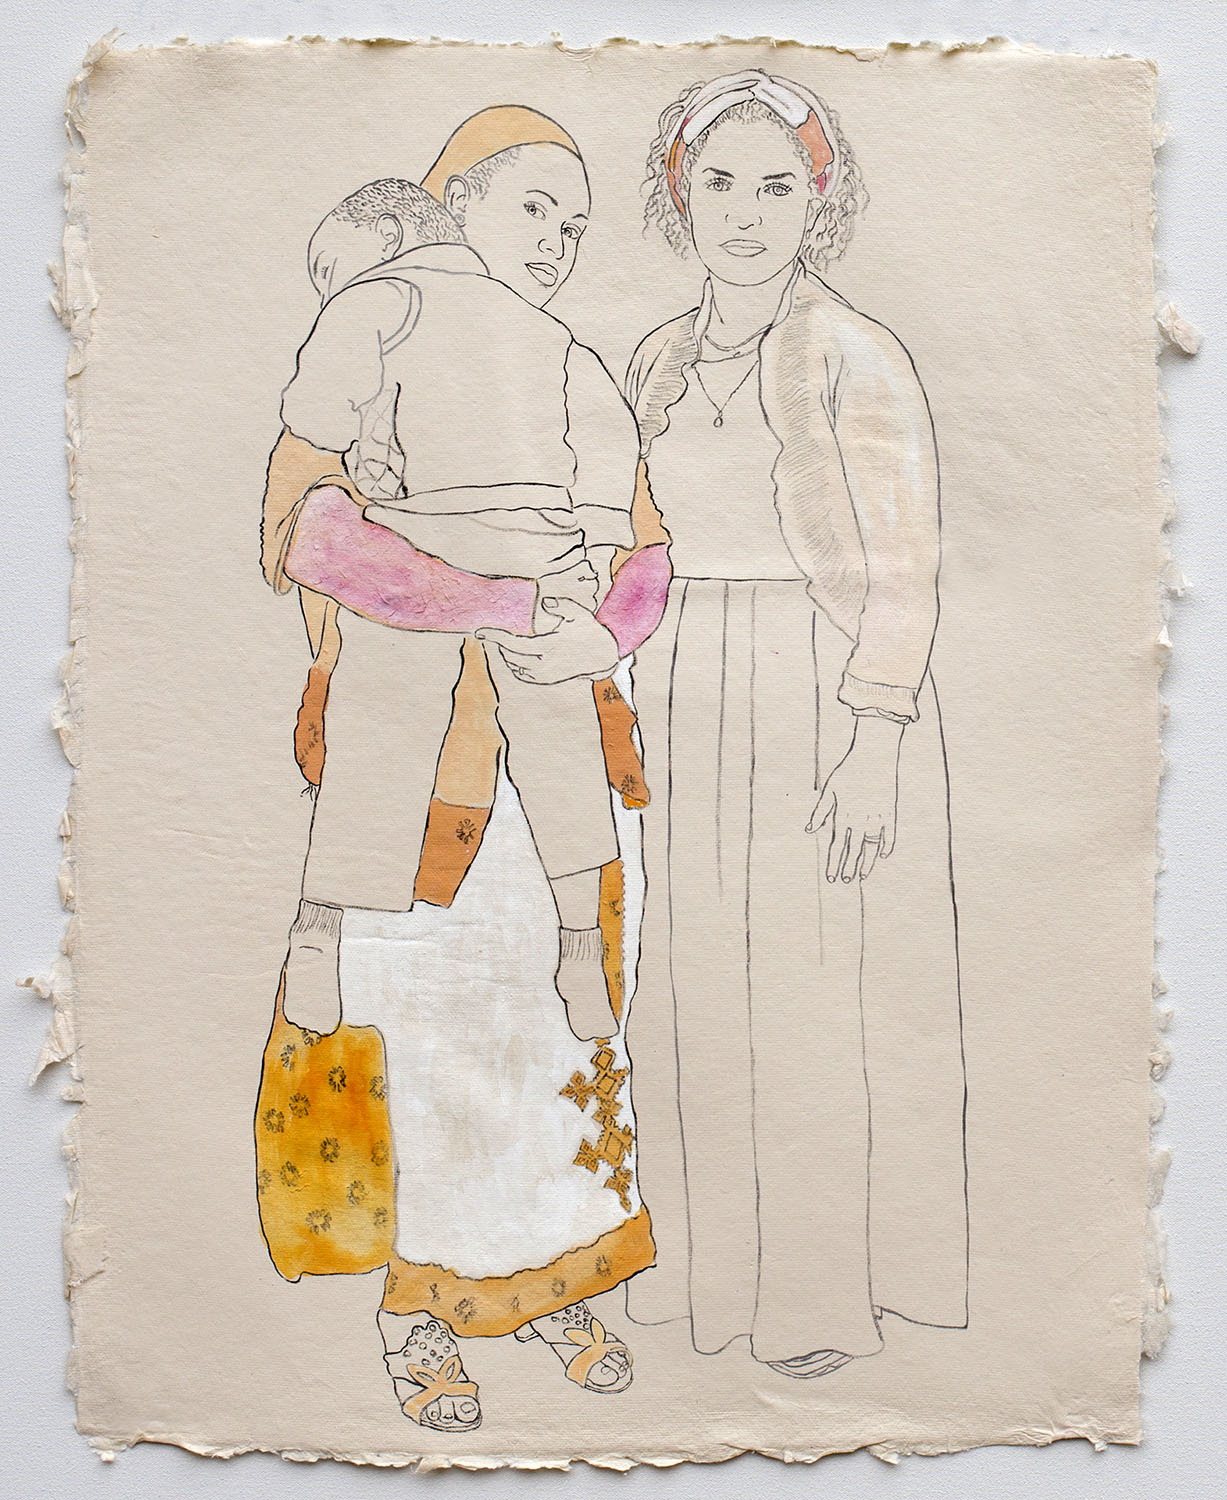   Young Mothers, Members of the Ethiopian Community in Seattle   2017, ink, watercolor, and gouache on handmade paper made in India from recycled clothing, 25" x 19.”   Port of Seattle purchase for the Nursing Suite in SeaTac Airport. 